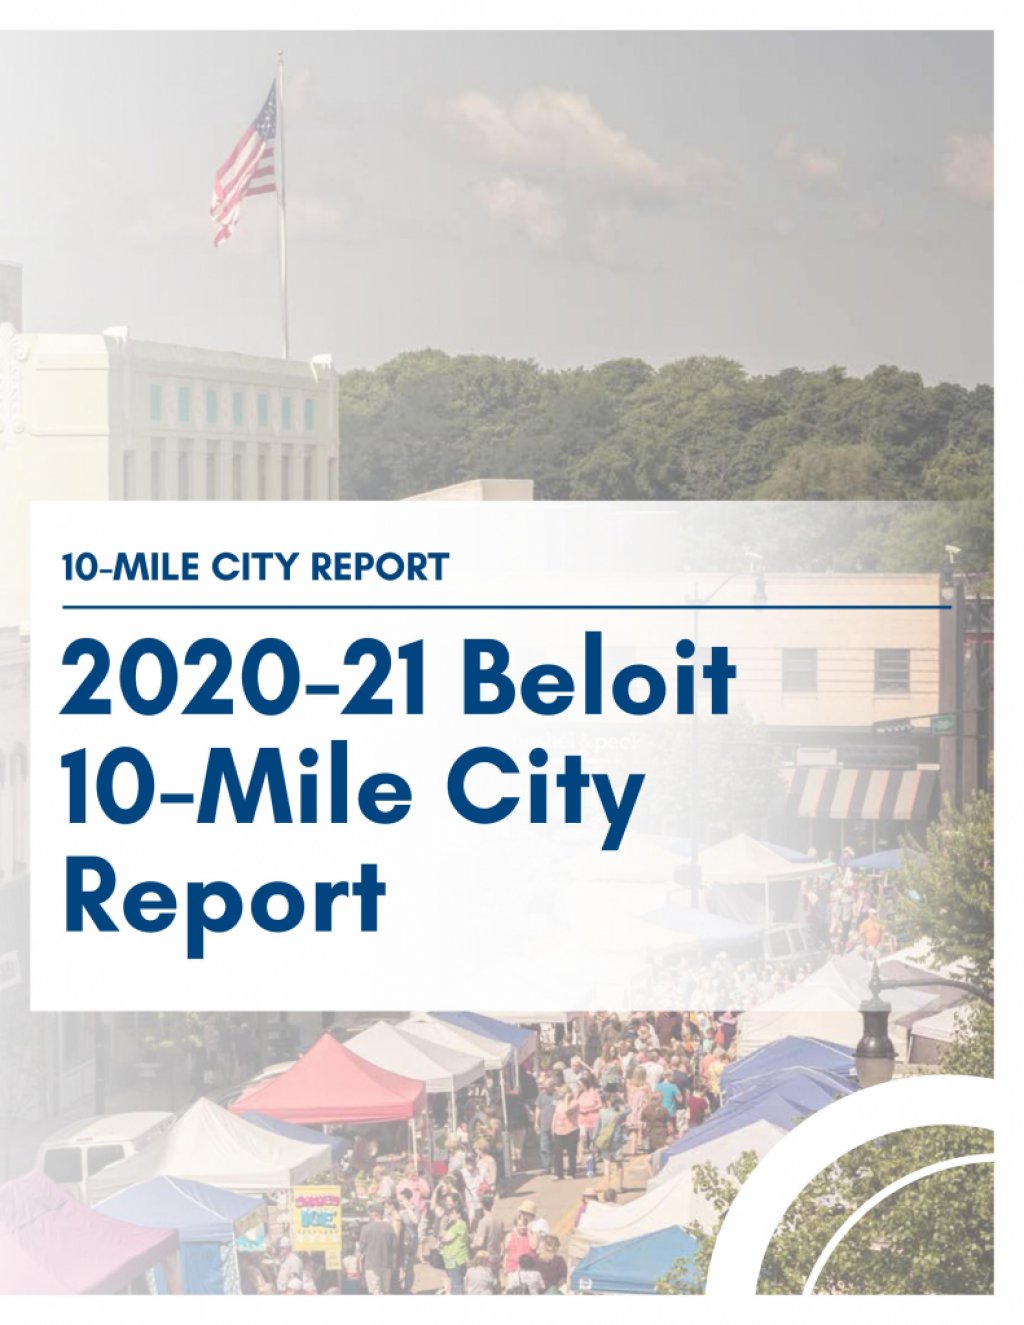 NEW REPORT PROVIDES INSIGHT INTO BELOIT ECONOMIC TRENDS AND DEVELOPMENT OPPORTUNITIES